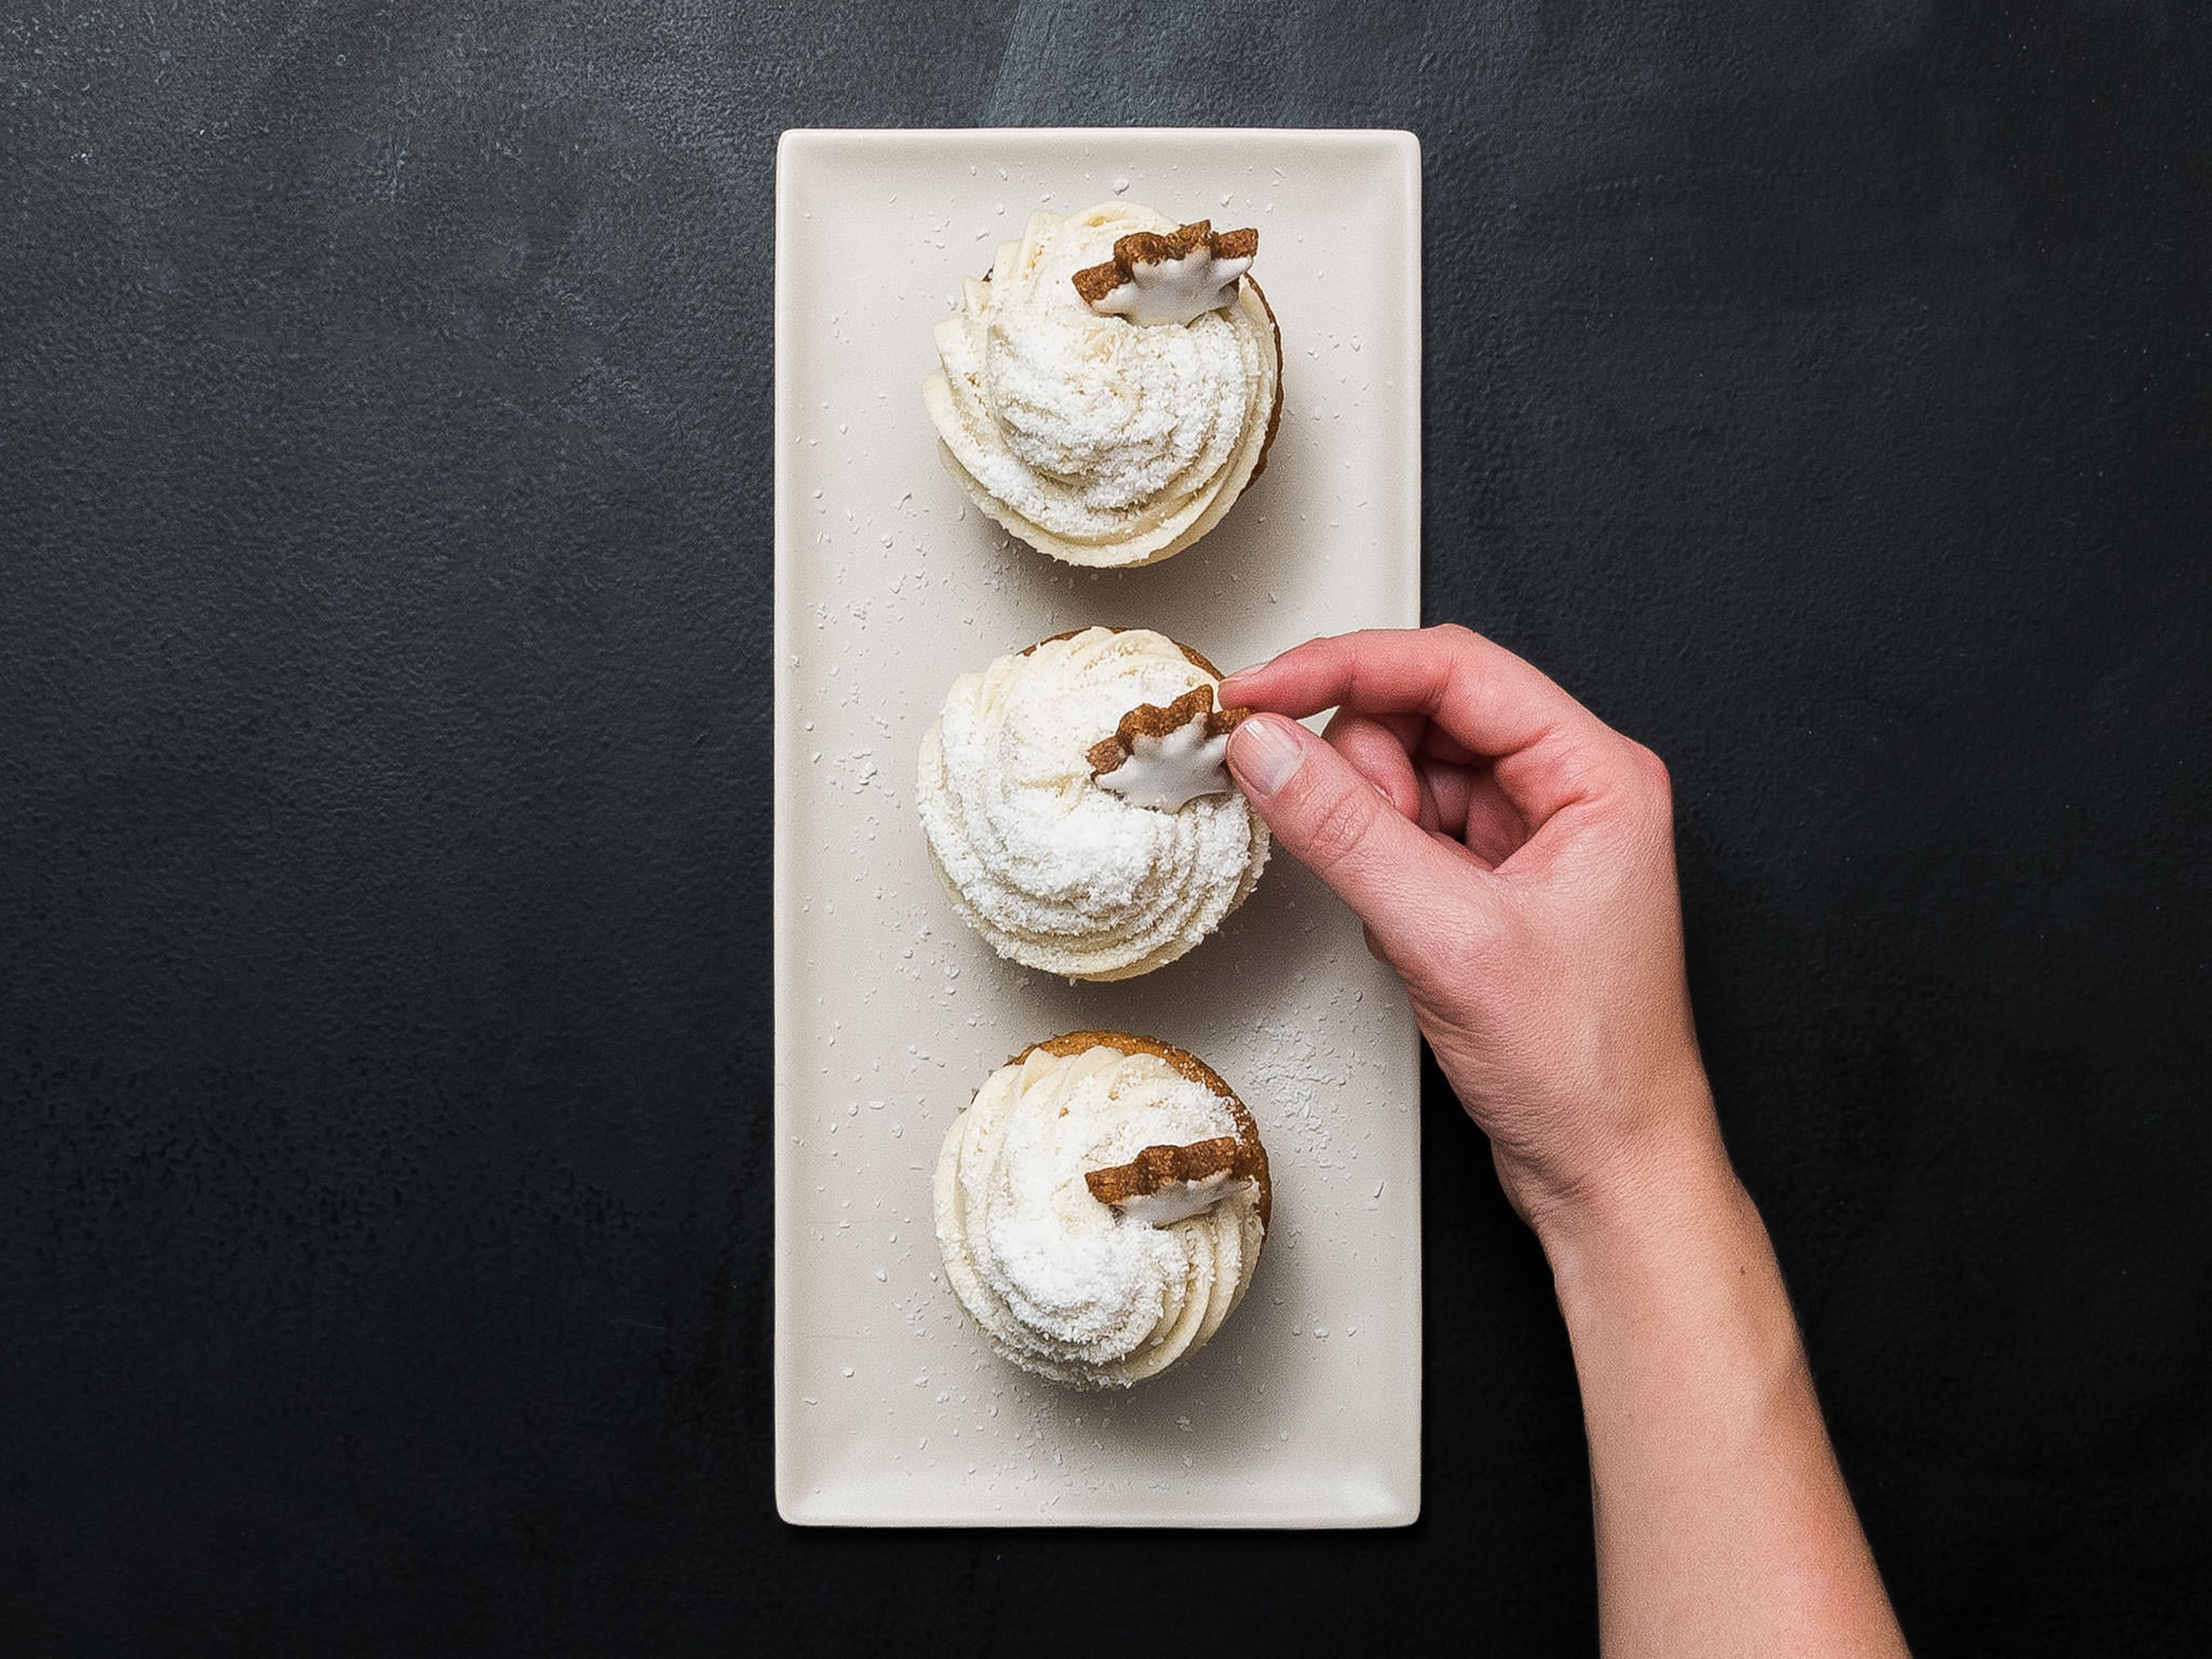 Meanwhile, for the frosting: beat butter until smooth. Add confectioner’s sugar little by little until combined. Add vanilla sugar and cream and beat until fluffy in consistency. Pipe onto cupcakes, then sprinkle shredded coconut over the cupcakes. Garnish with a cinnamon star. Enjoy!